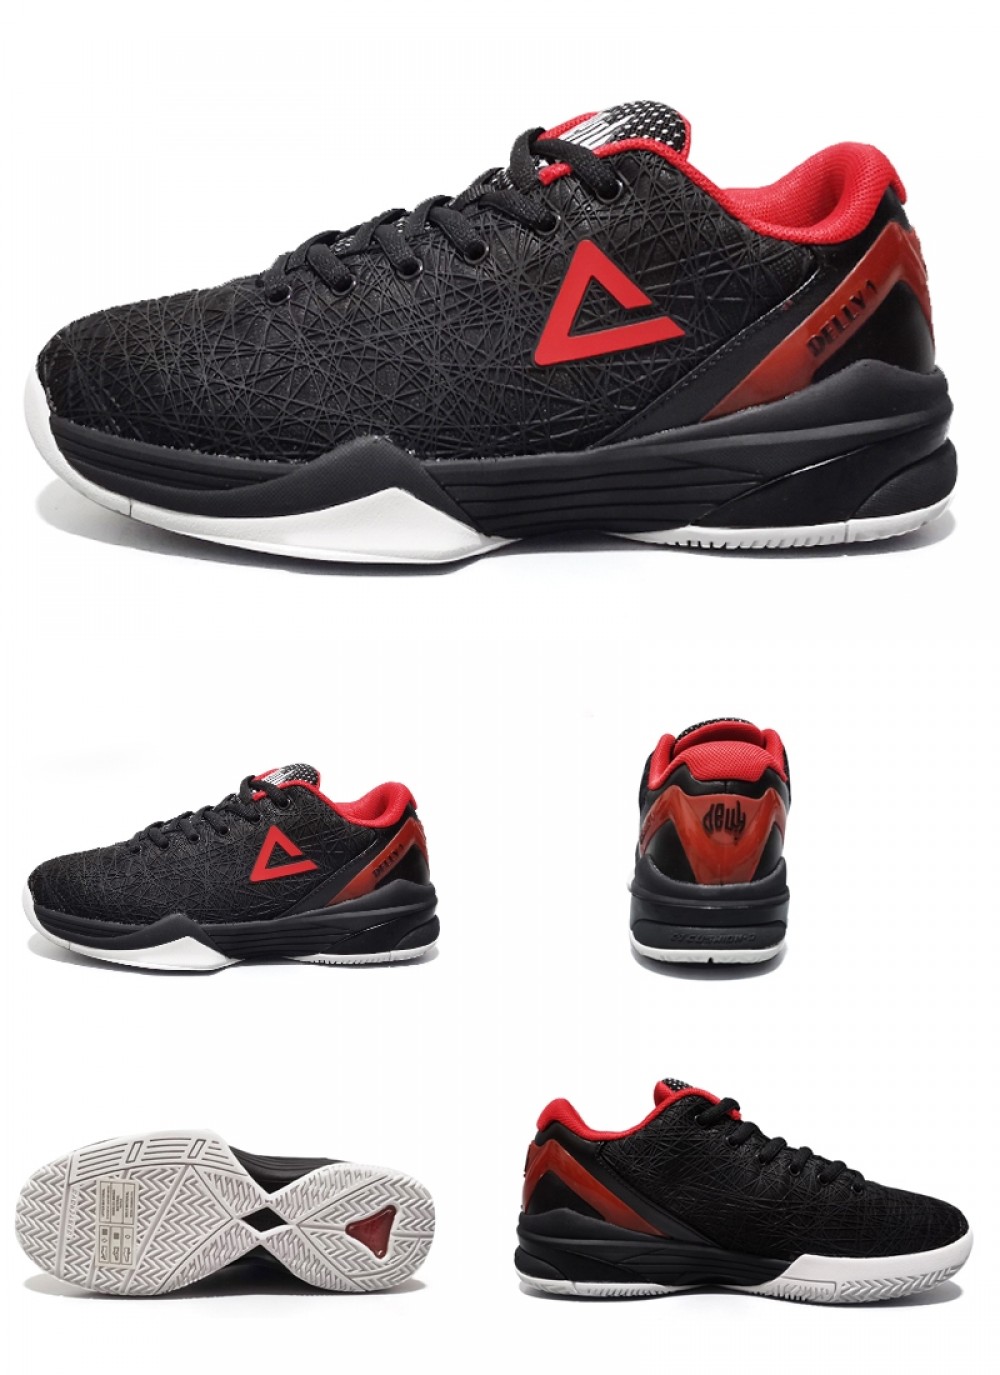 Peak Delly1 Basketball Shoes - Black/Red